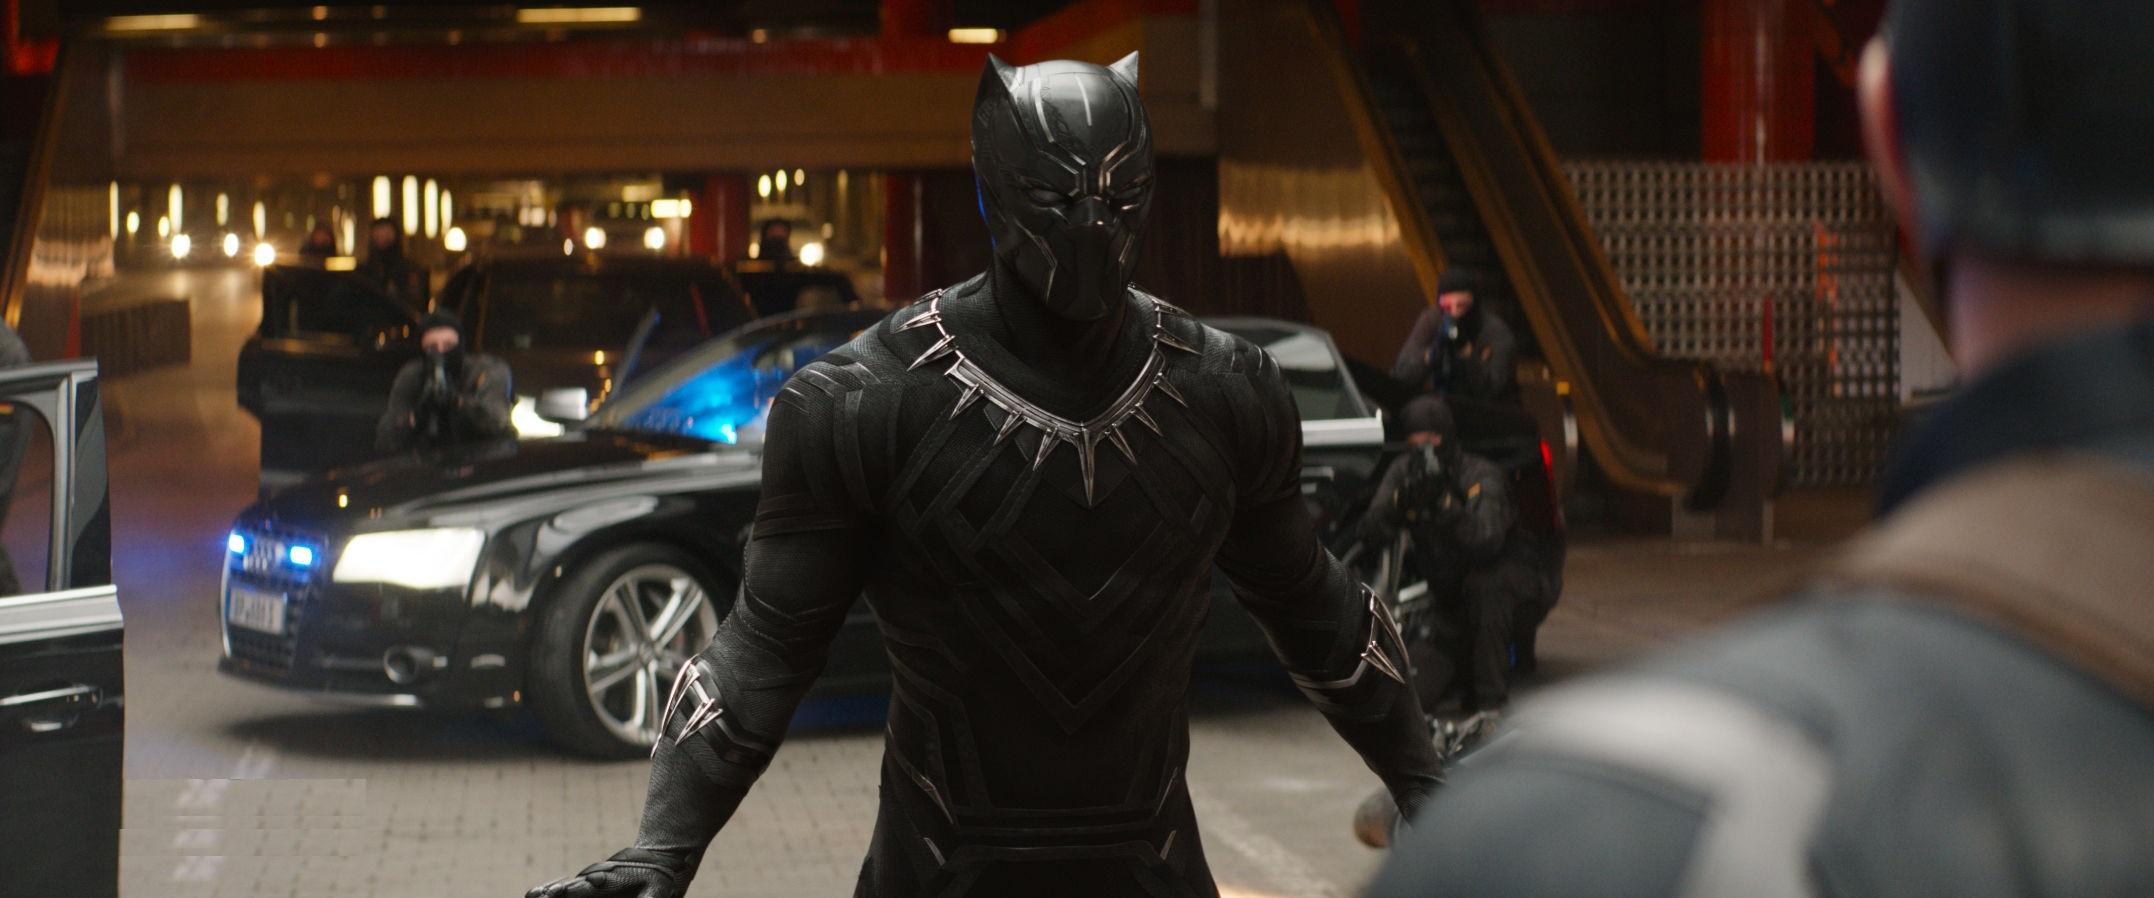 Black Panther 2018 HD 5K Wallpapers | HD Wallpapers | ID #22876